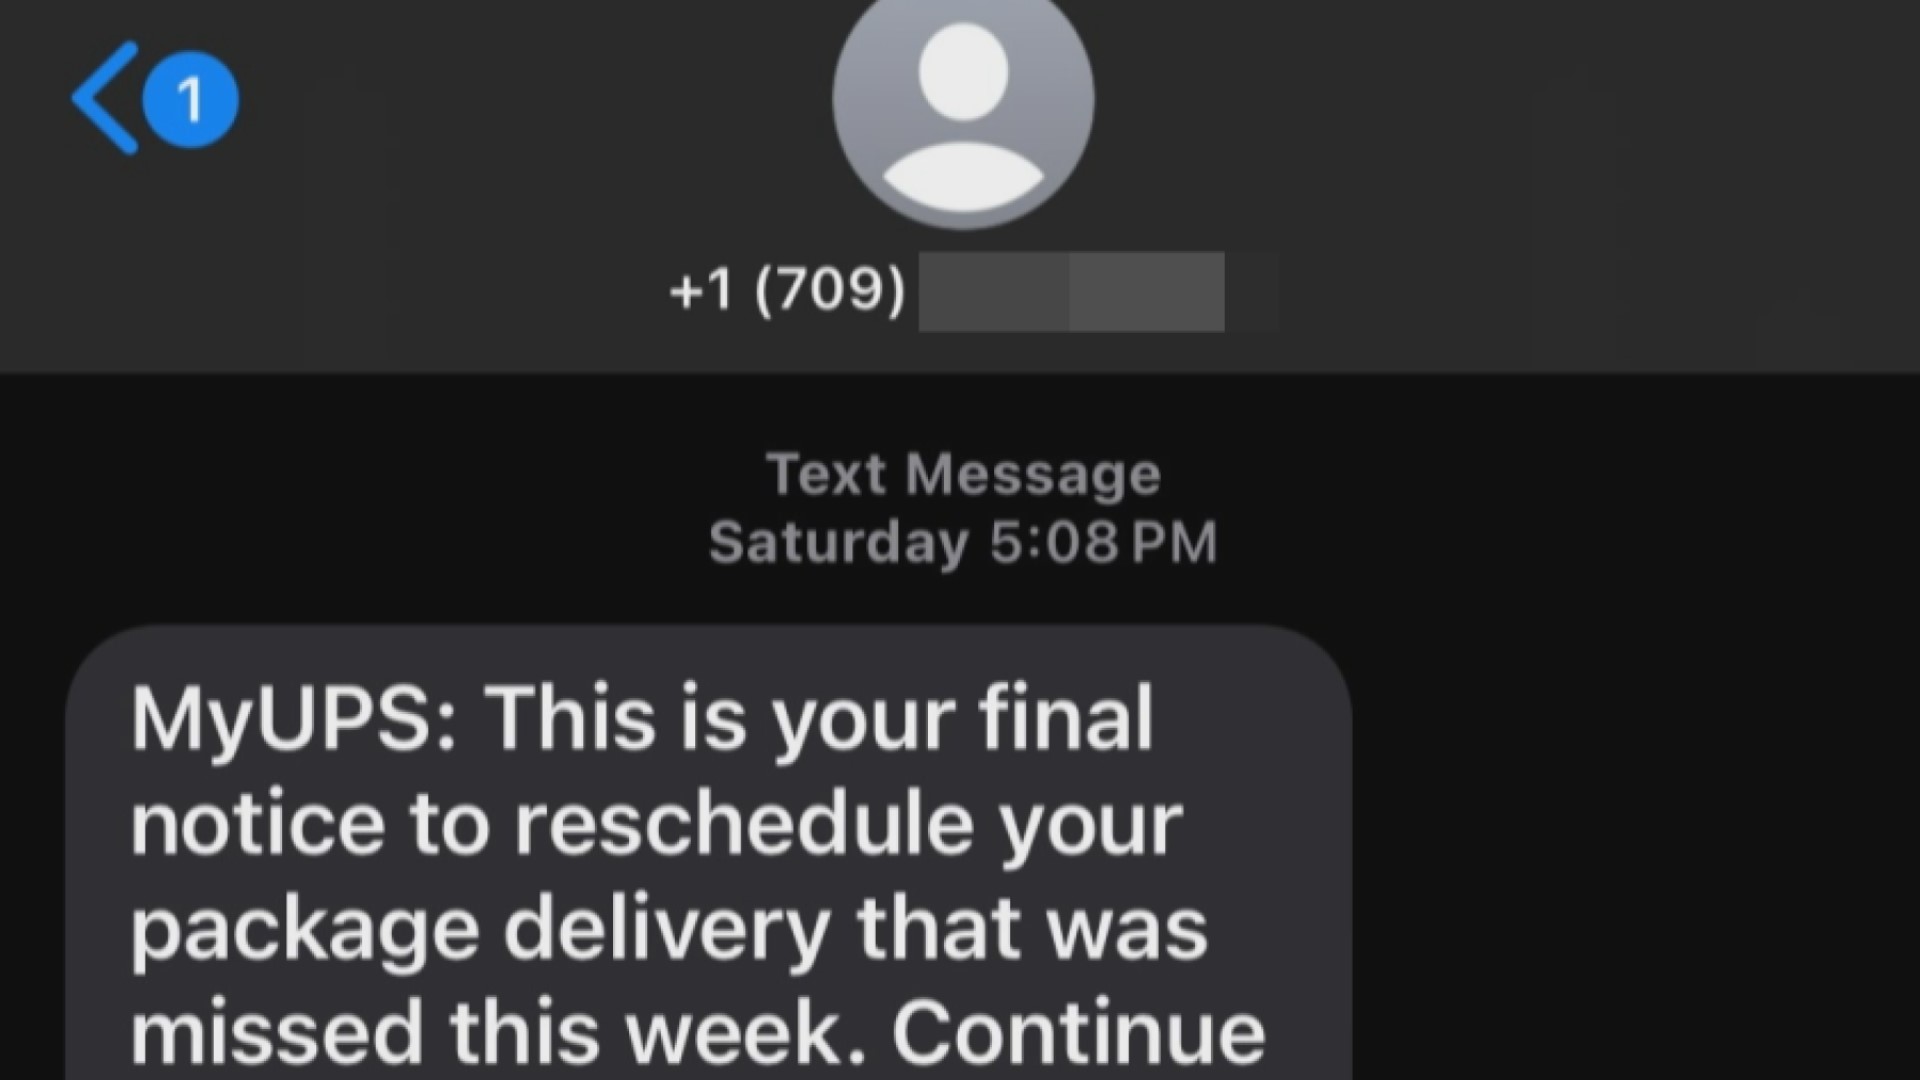 You get a text, seemingly from UPS. It claims you’ve missed a package delivery, and it’s your final notice to reschedule…